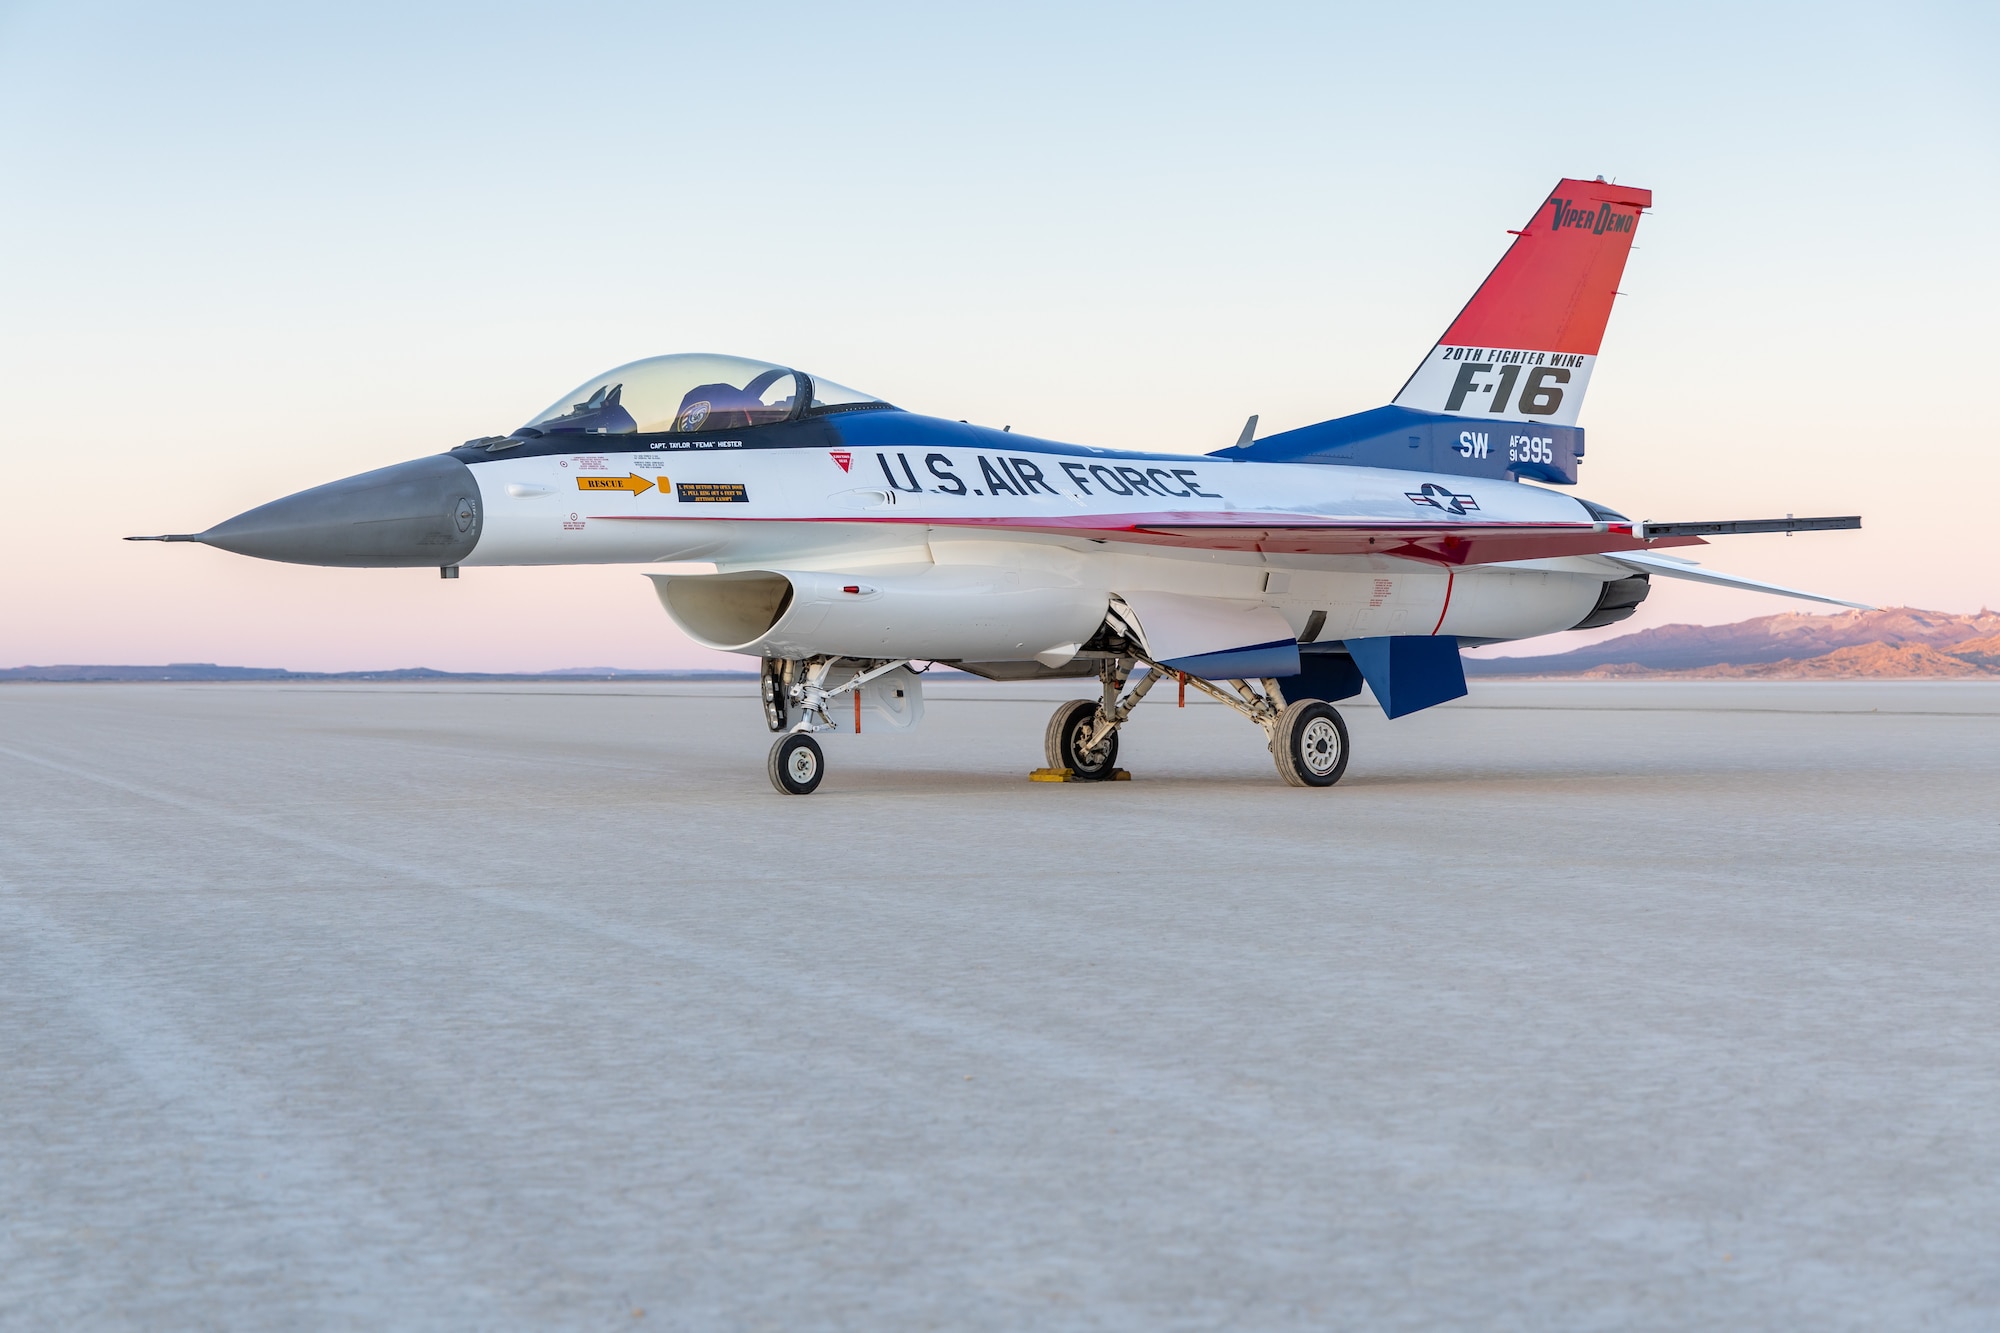 The 412th Maintenance Group, Fabrication Flight - Corrosion Control Team recently repainted the F-16 Viper Demo Team aircraft in the classic YF-16 livery to commemorate the platform's first flight 50 years ago at Edwards Air Force Base, California. (Air Force photo by James West)